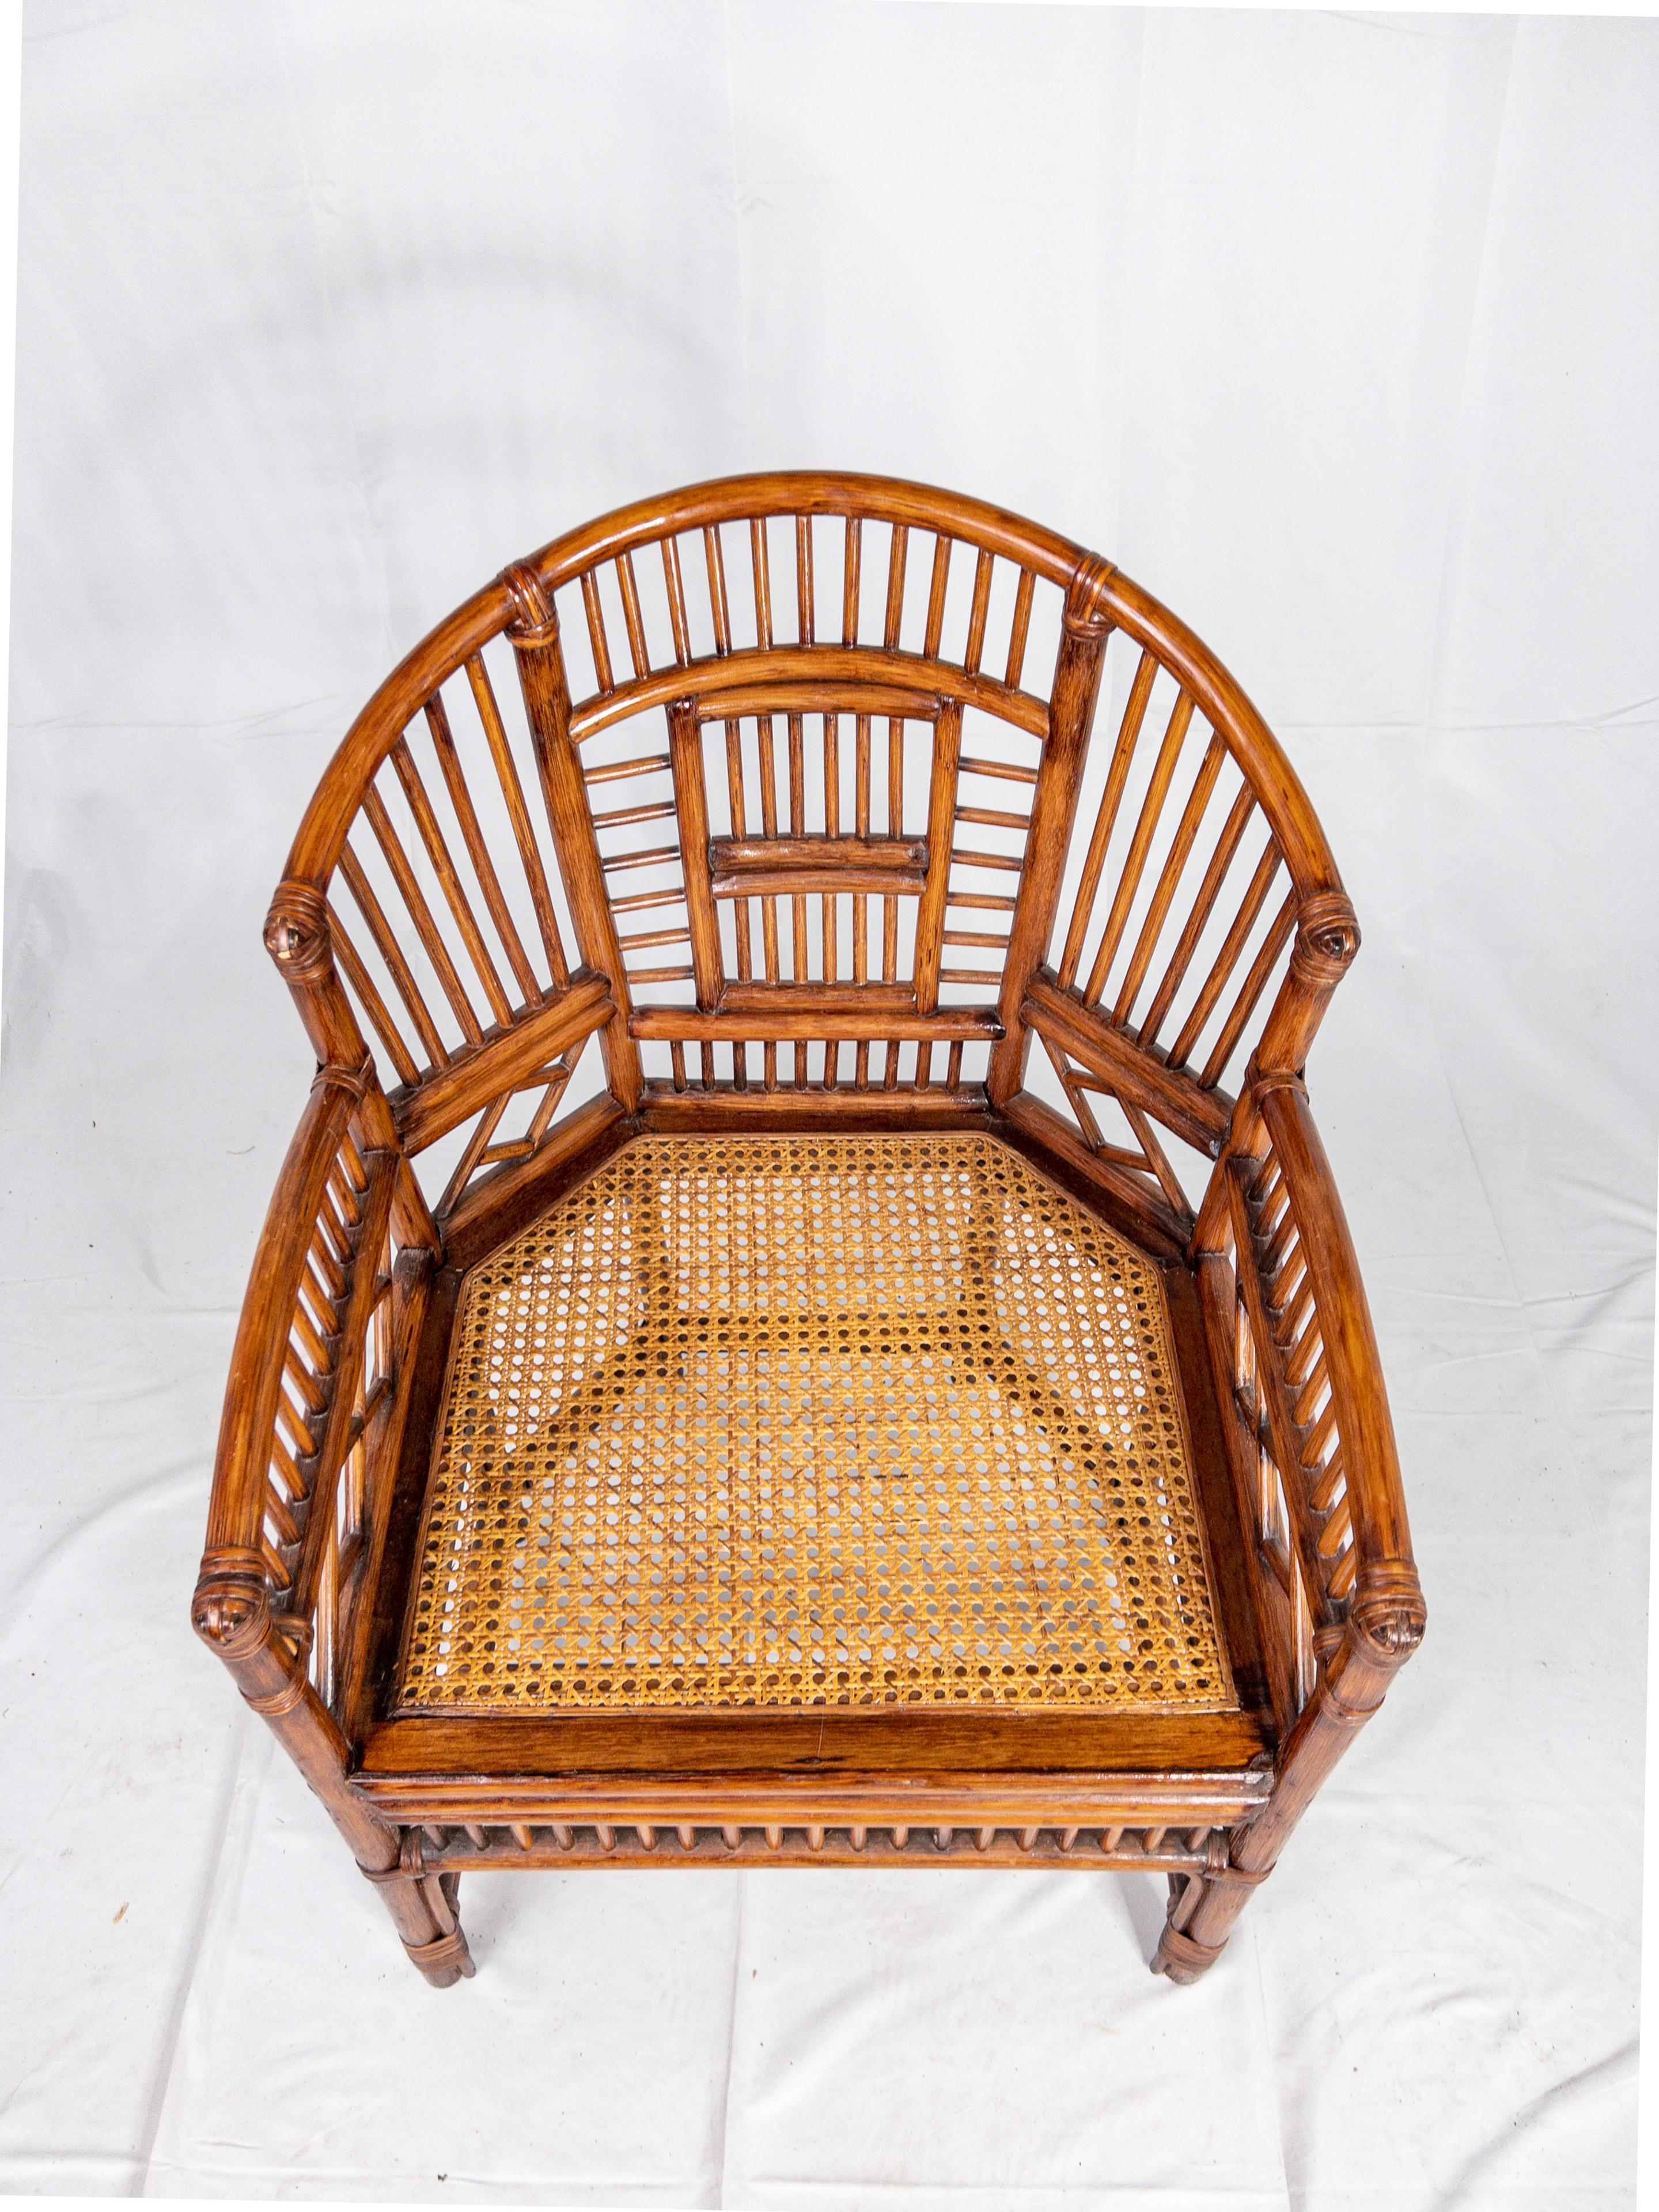 Vintage Brighton Scorched Bamboo Chippendale Chair with Rattan Seats 2